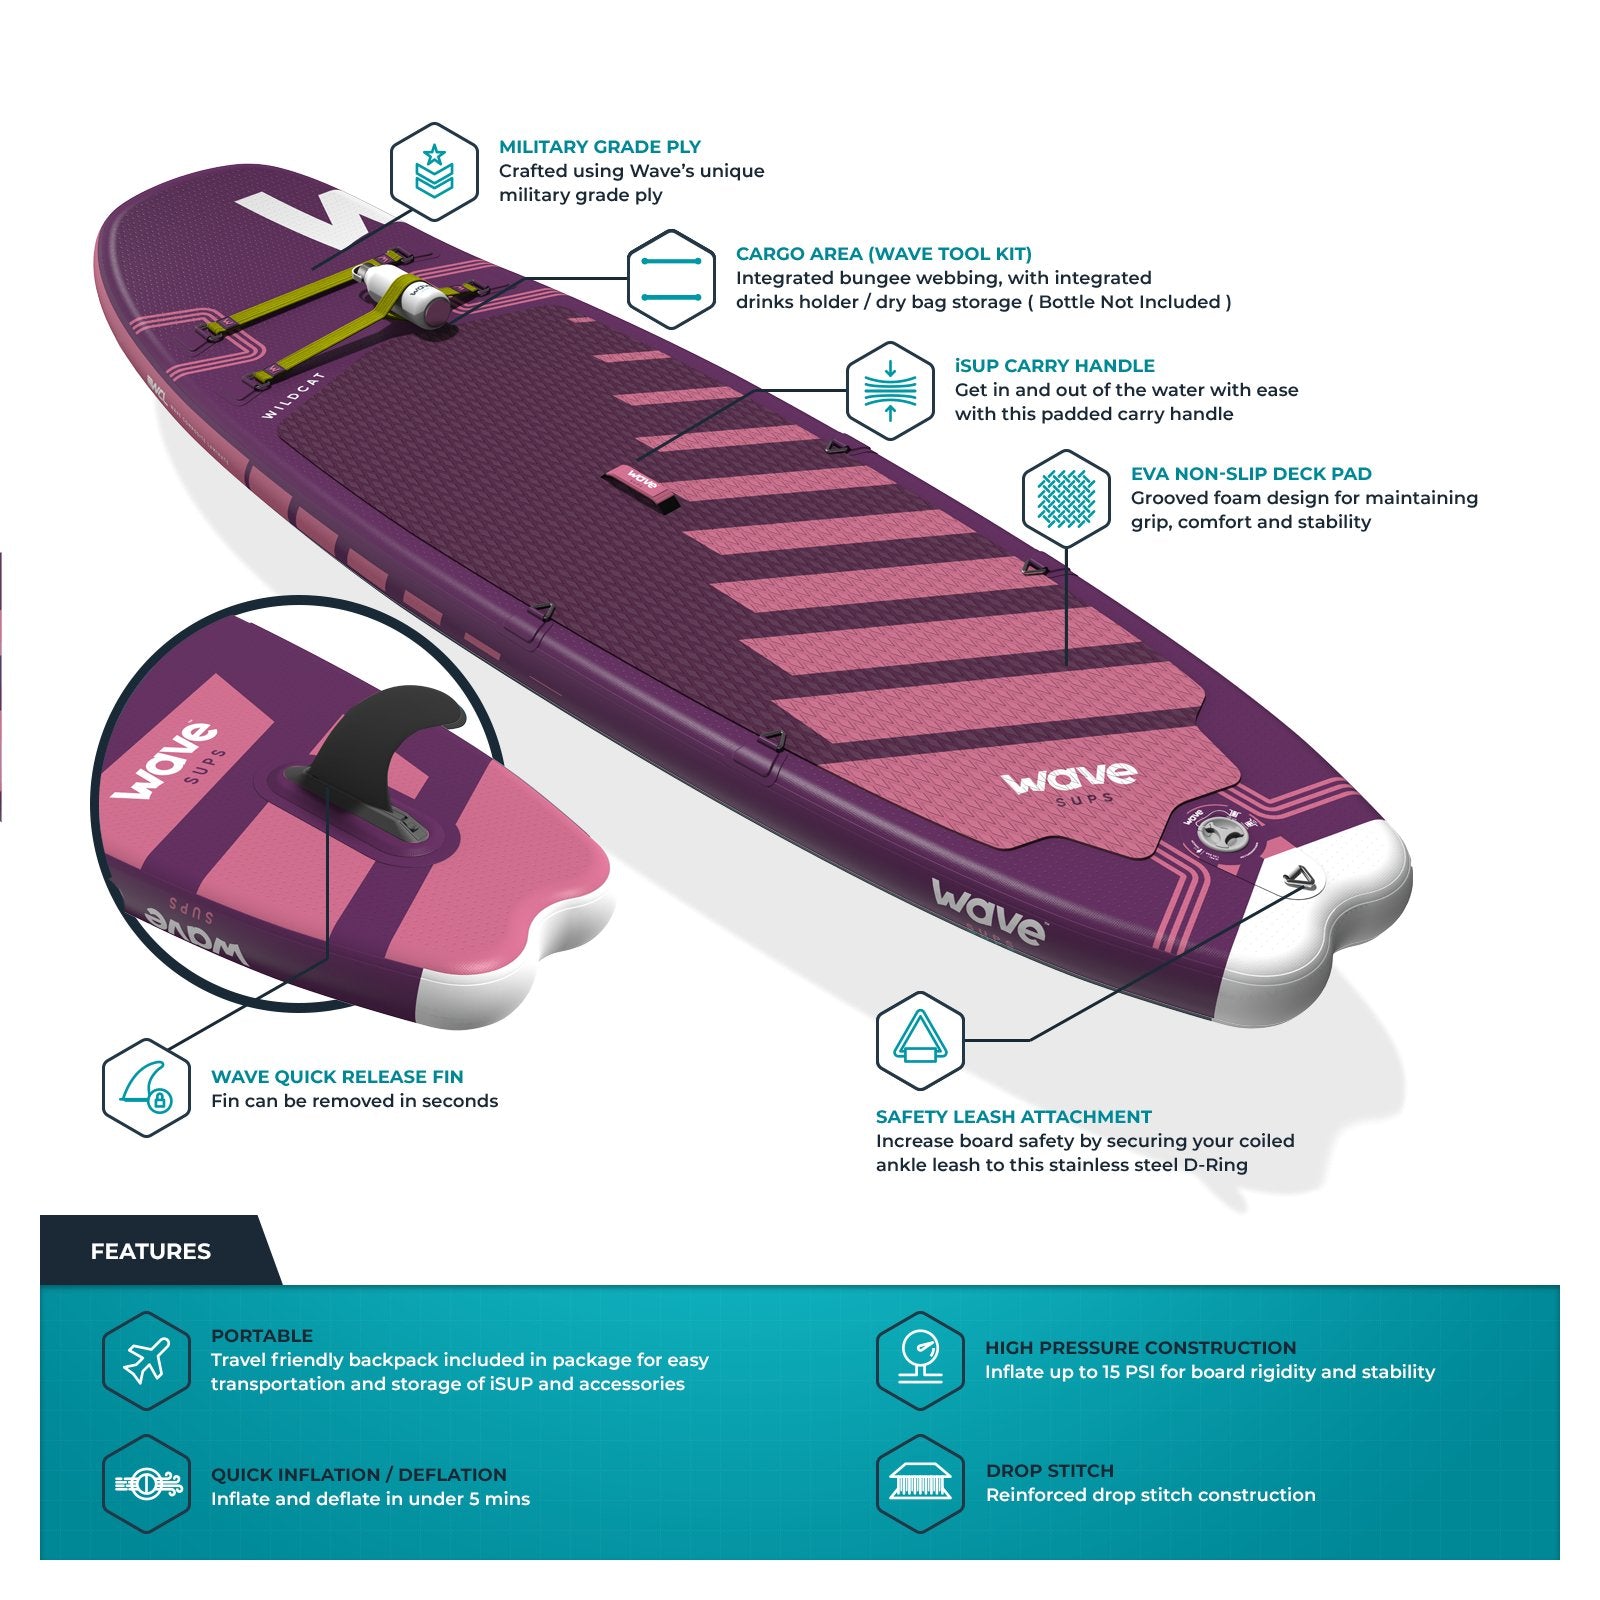 Wildcat SUP | Inflatable Stand-Up Paddleboard | Surf SUP Package | 8.6ft | Purple - Wave Sups UK